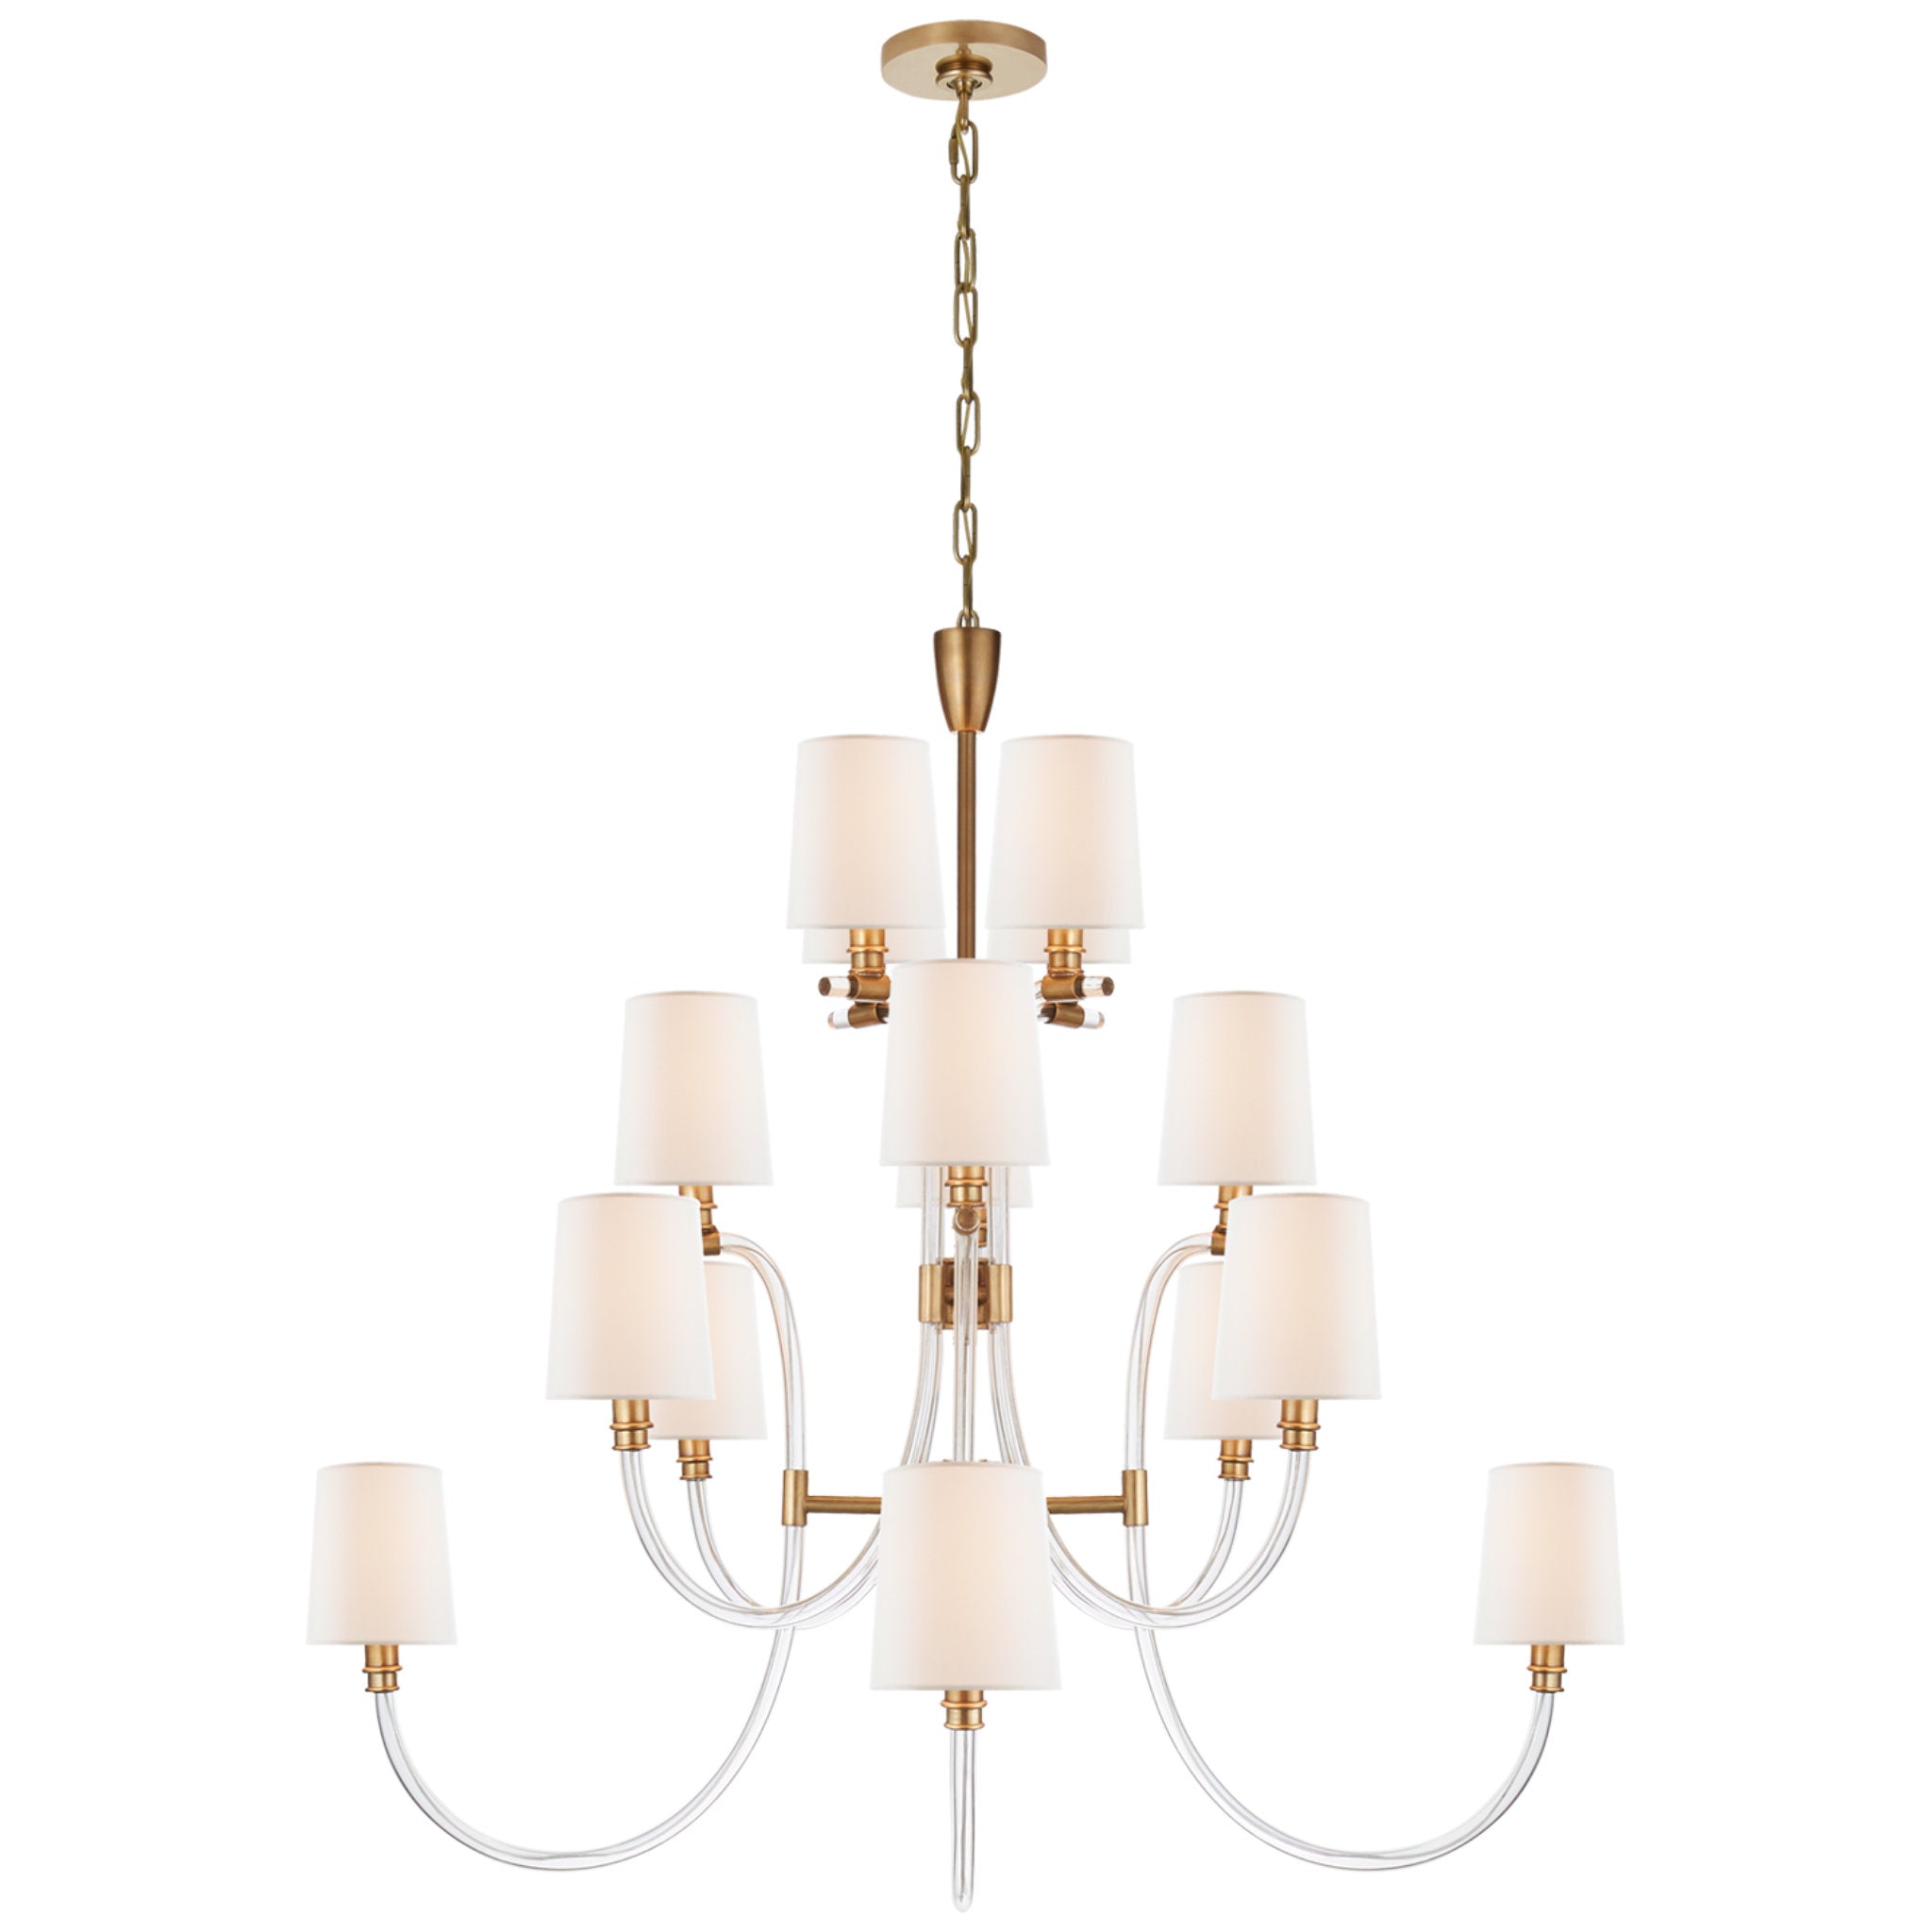 Julie Neill Clarice Large Chandelier in Clear Acrylic and Antique-Burnished Brass with Linen Shades